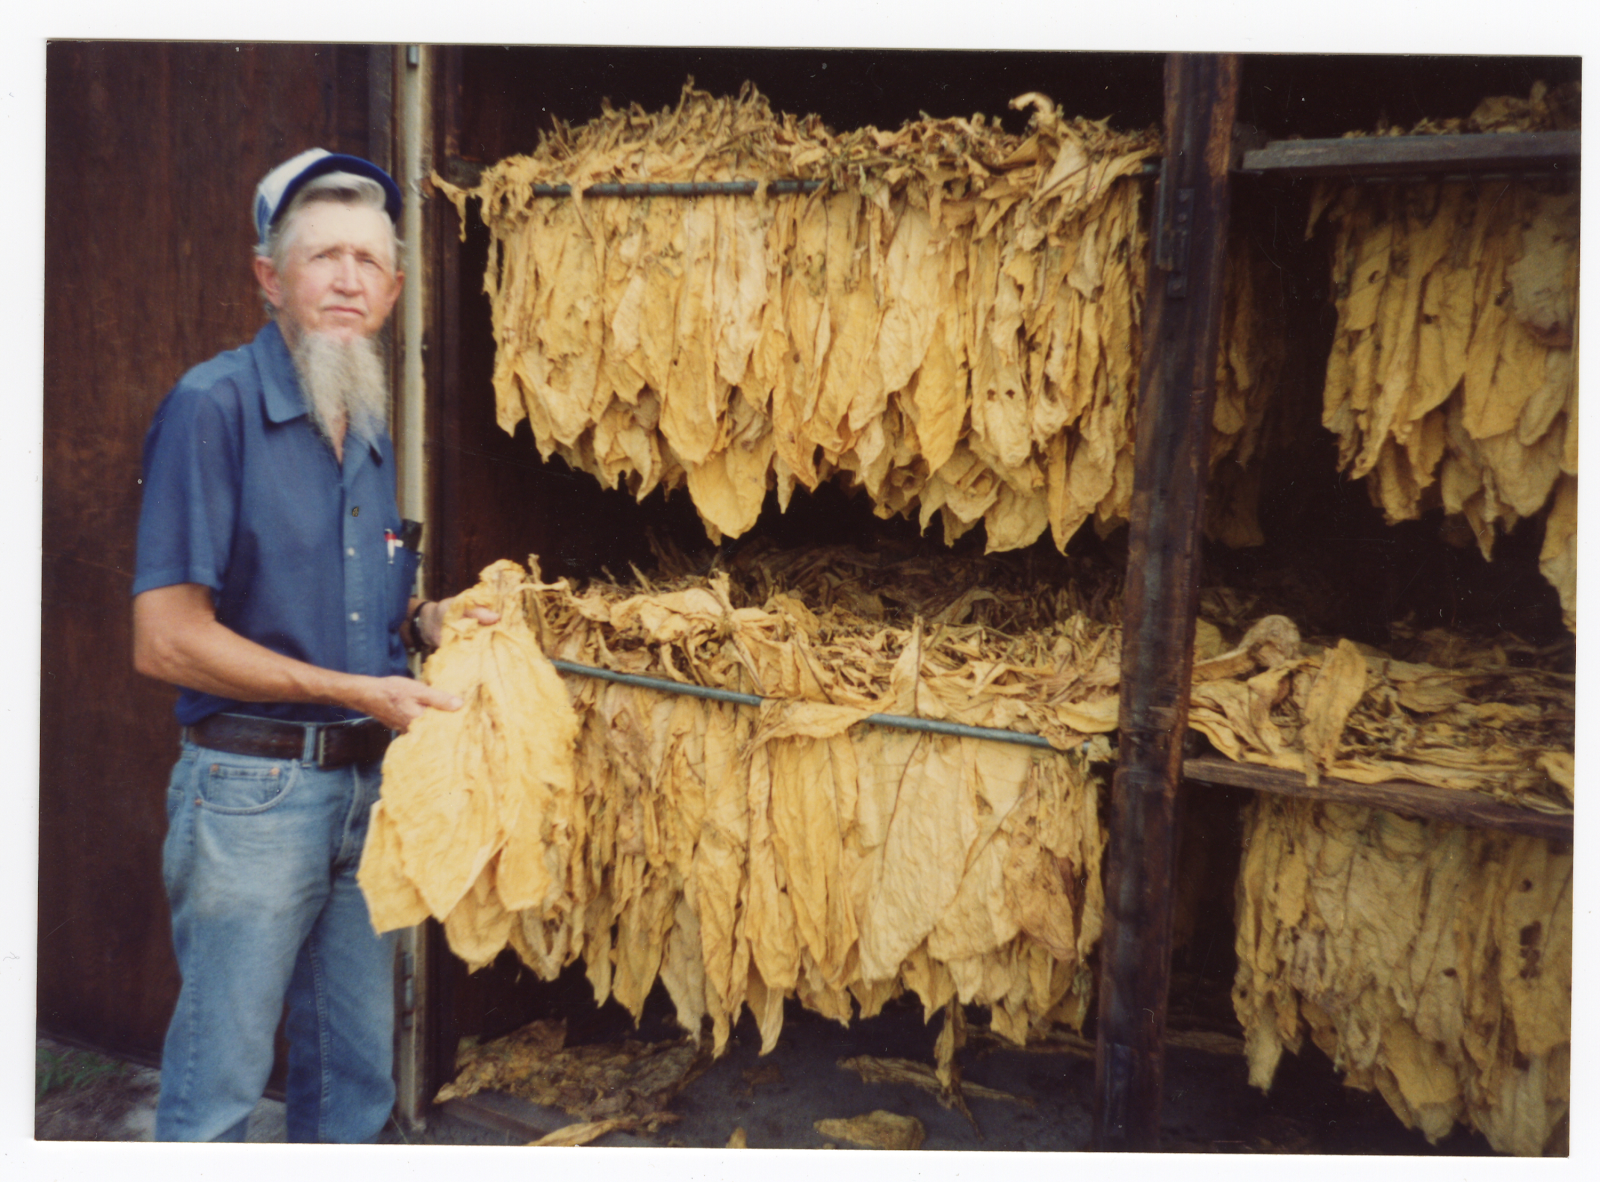 old man with long beard holds tobacco and standing in front of tobacco produce